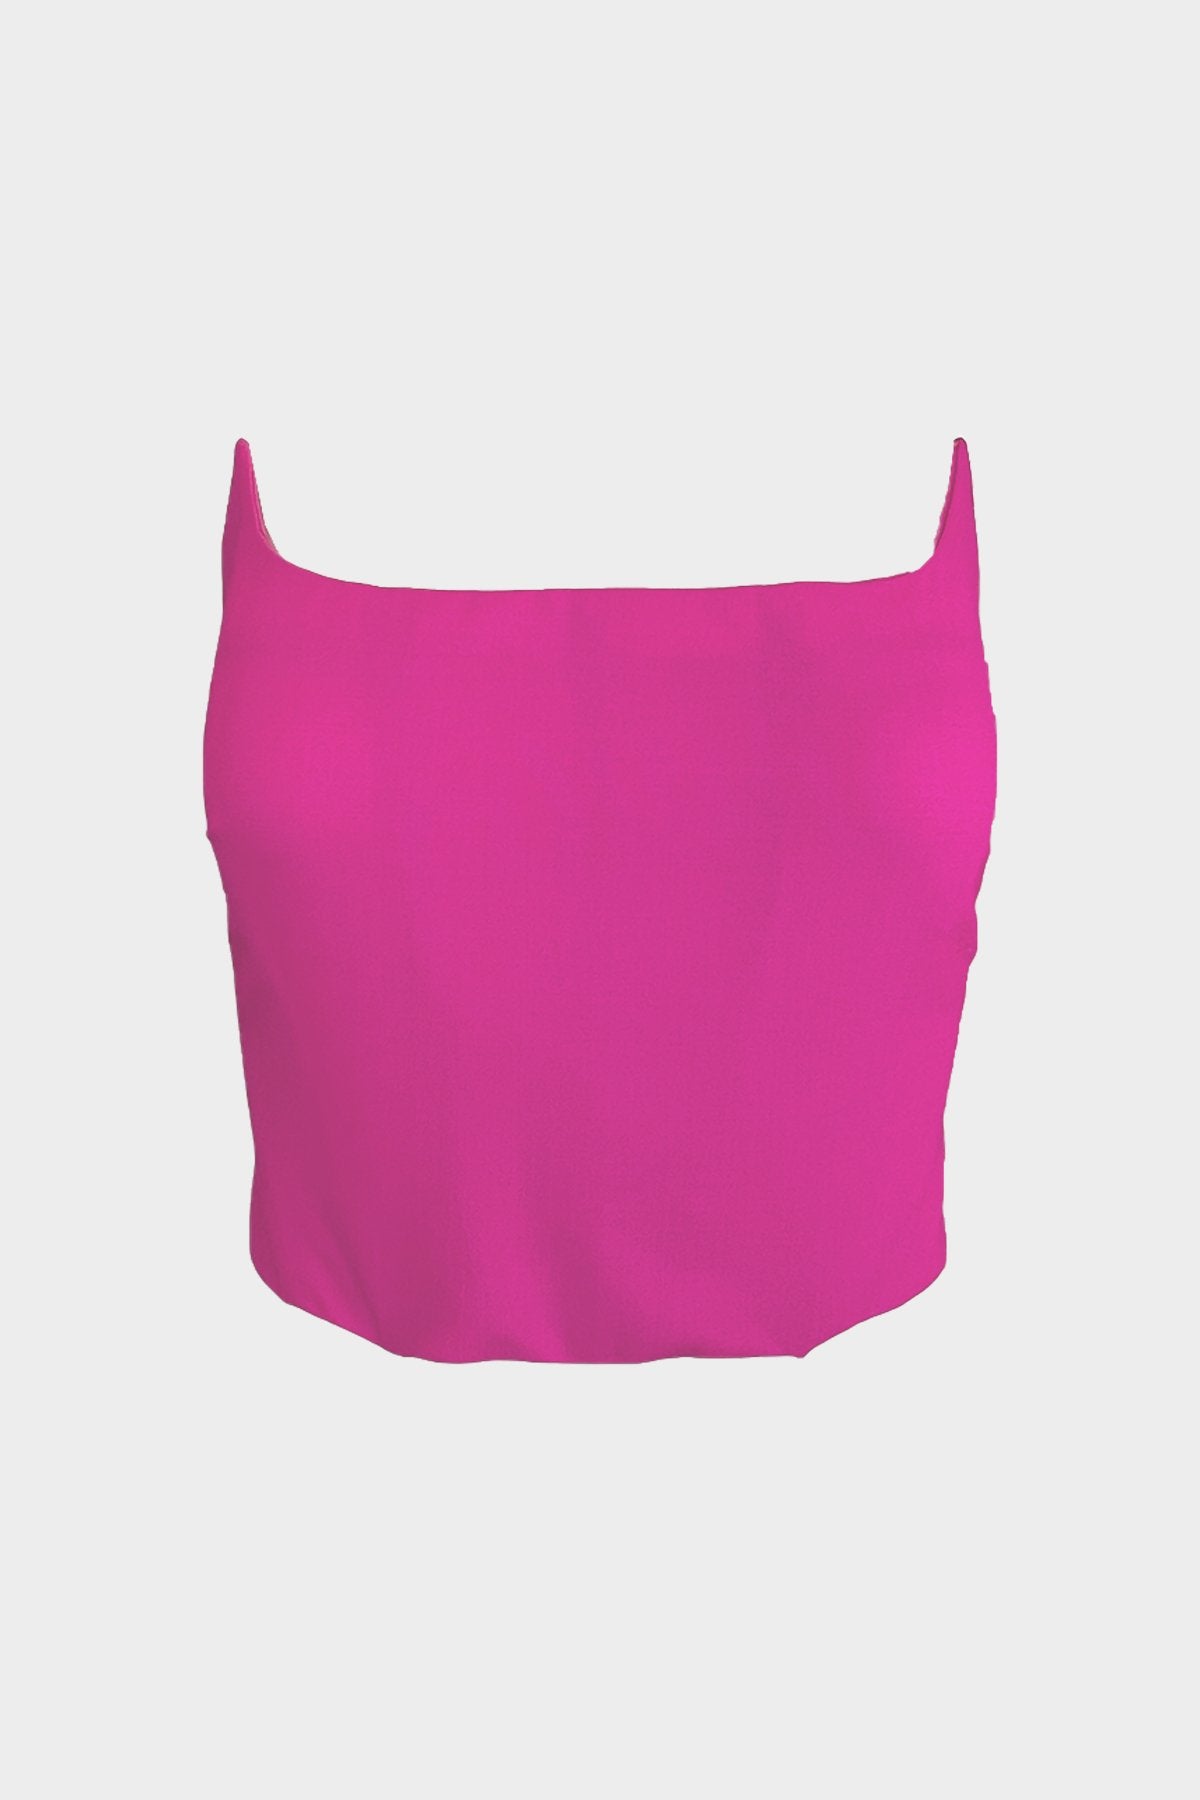 Double Twisted Light Wool Bustier Top in Hot Pink - shop-olivia.com